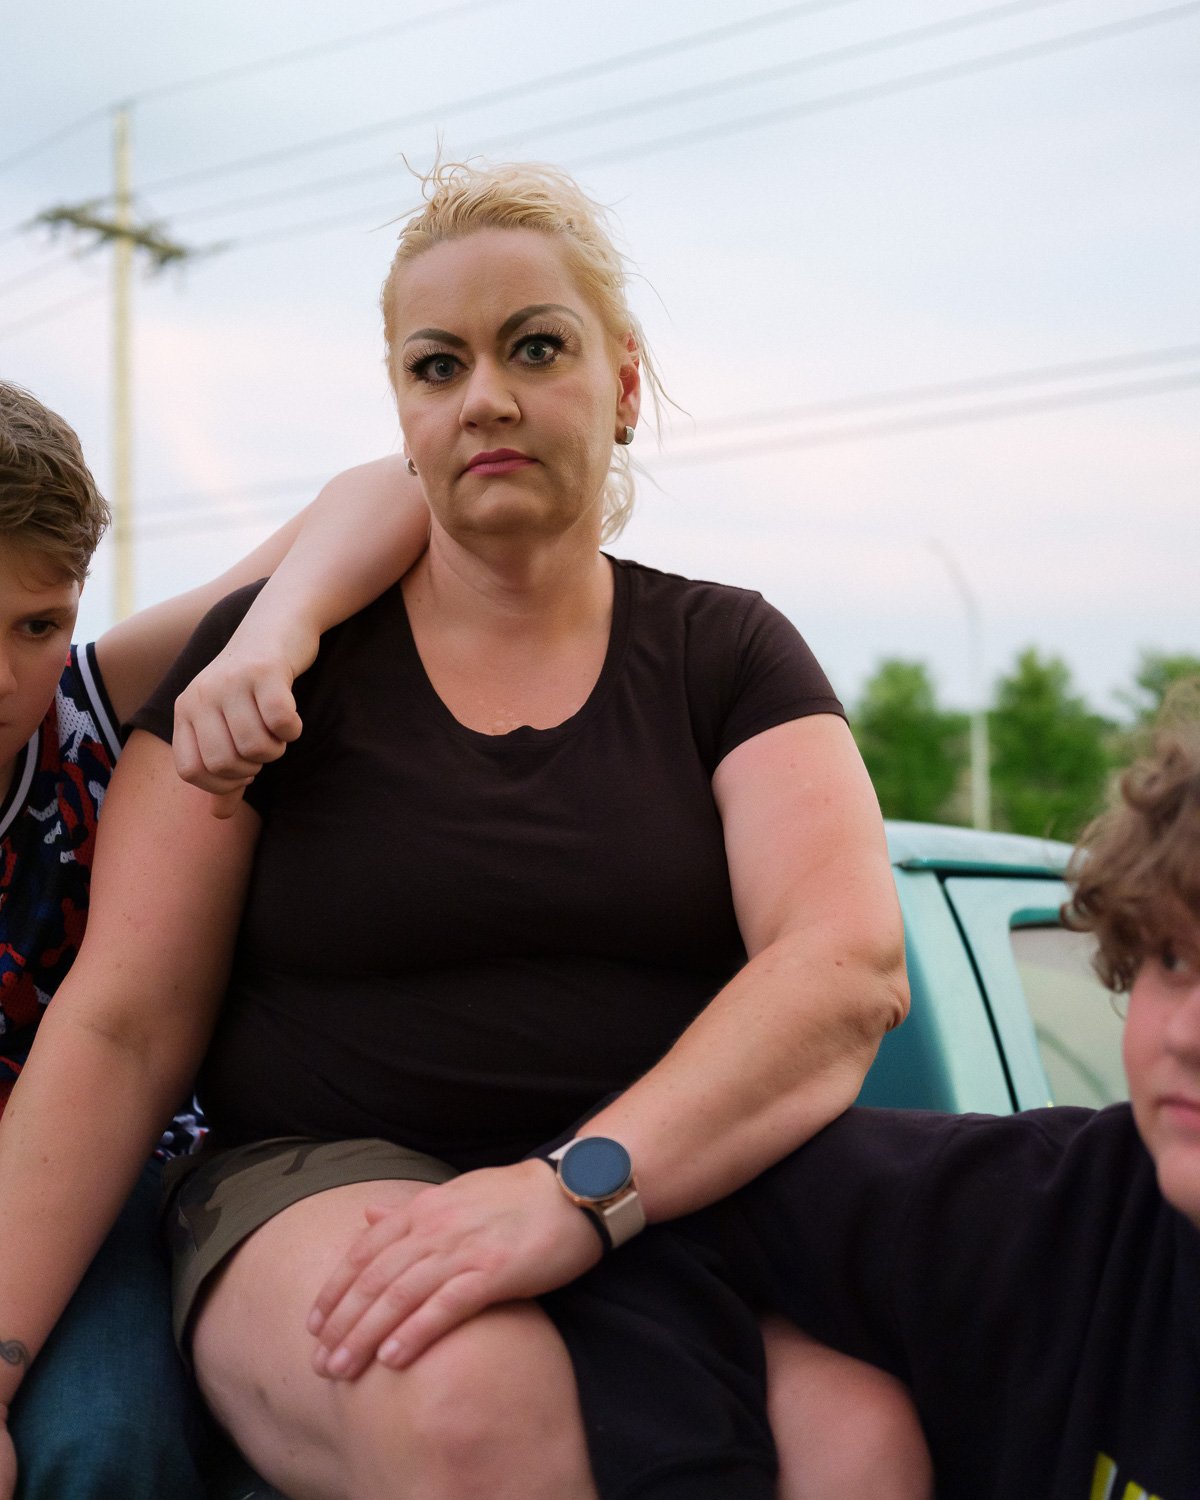  Trump supporter Danni Rhiley with her sons Masen Rhiley and Jacksen Hanten, Omaha, NE, for The New York Times, 2020 